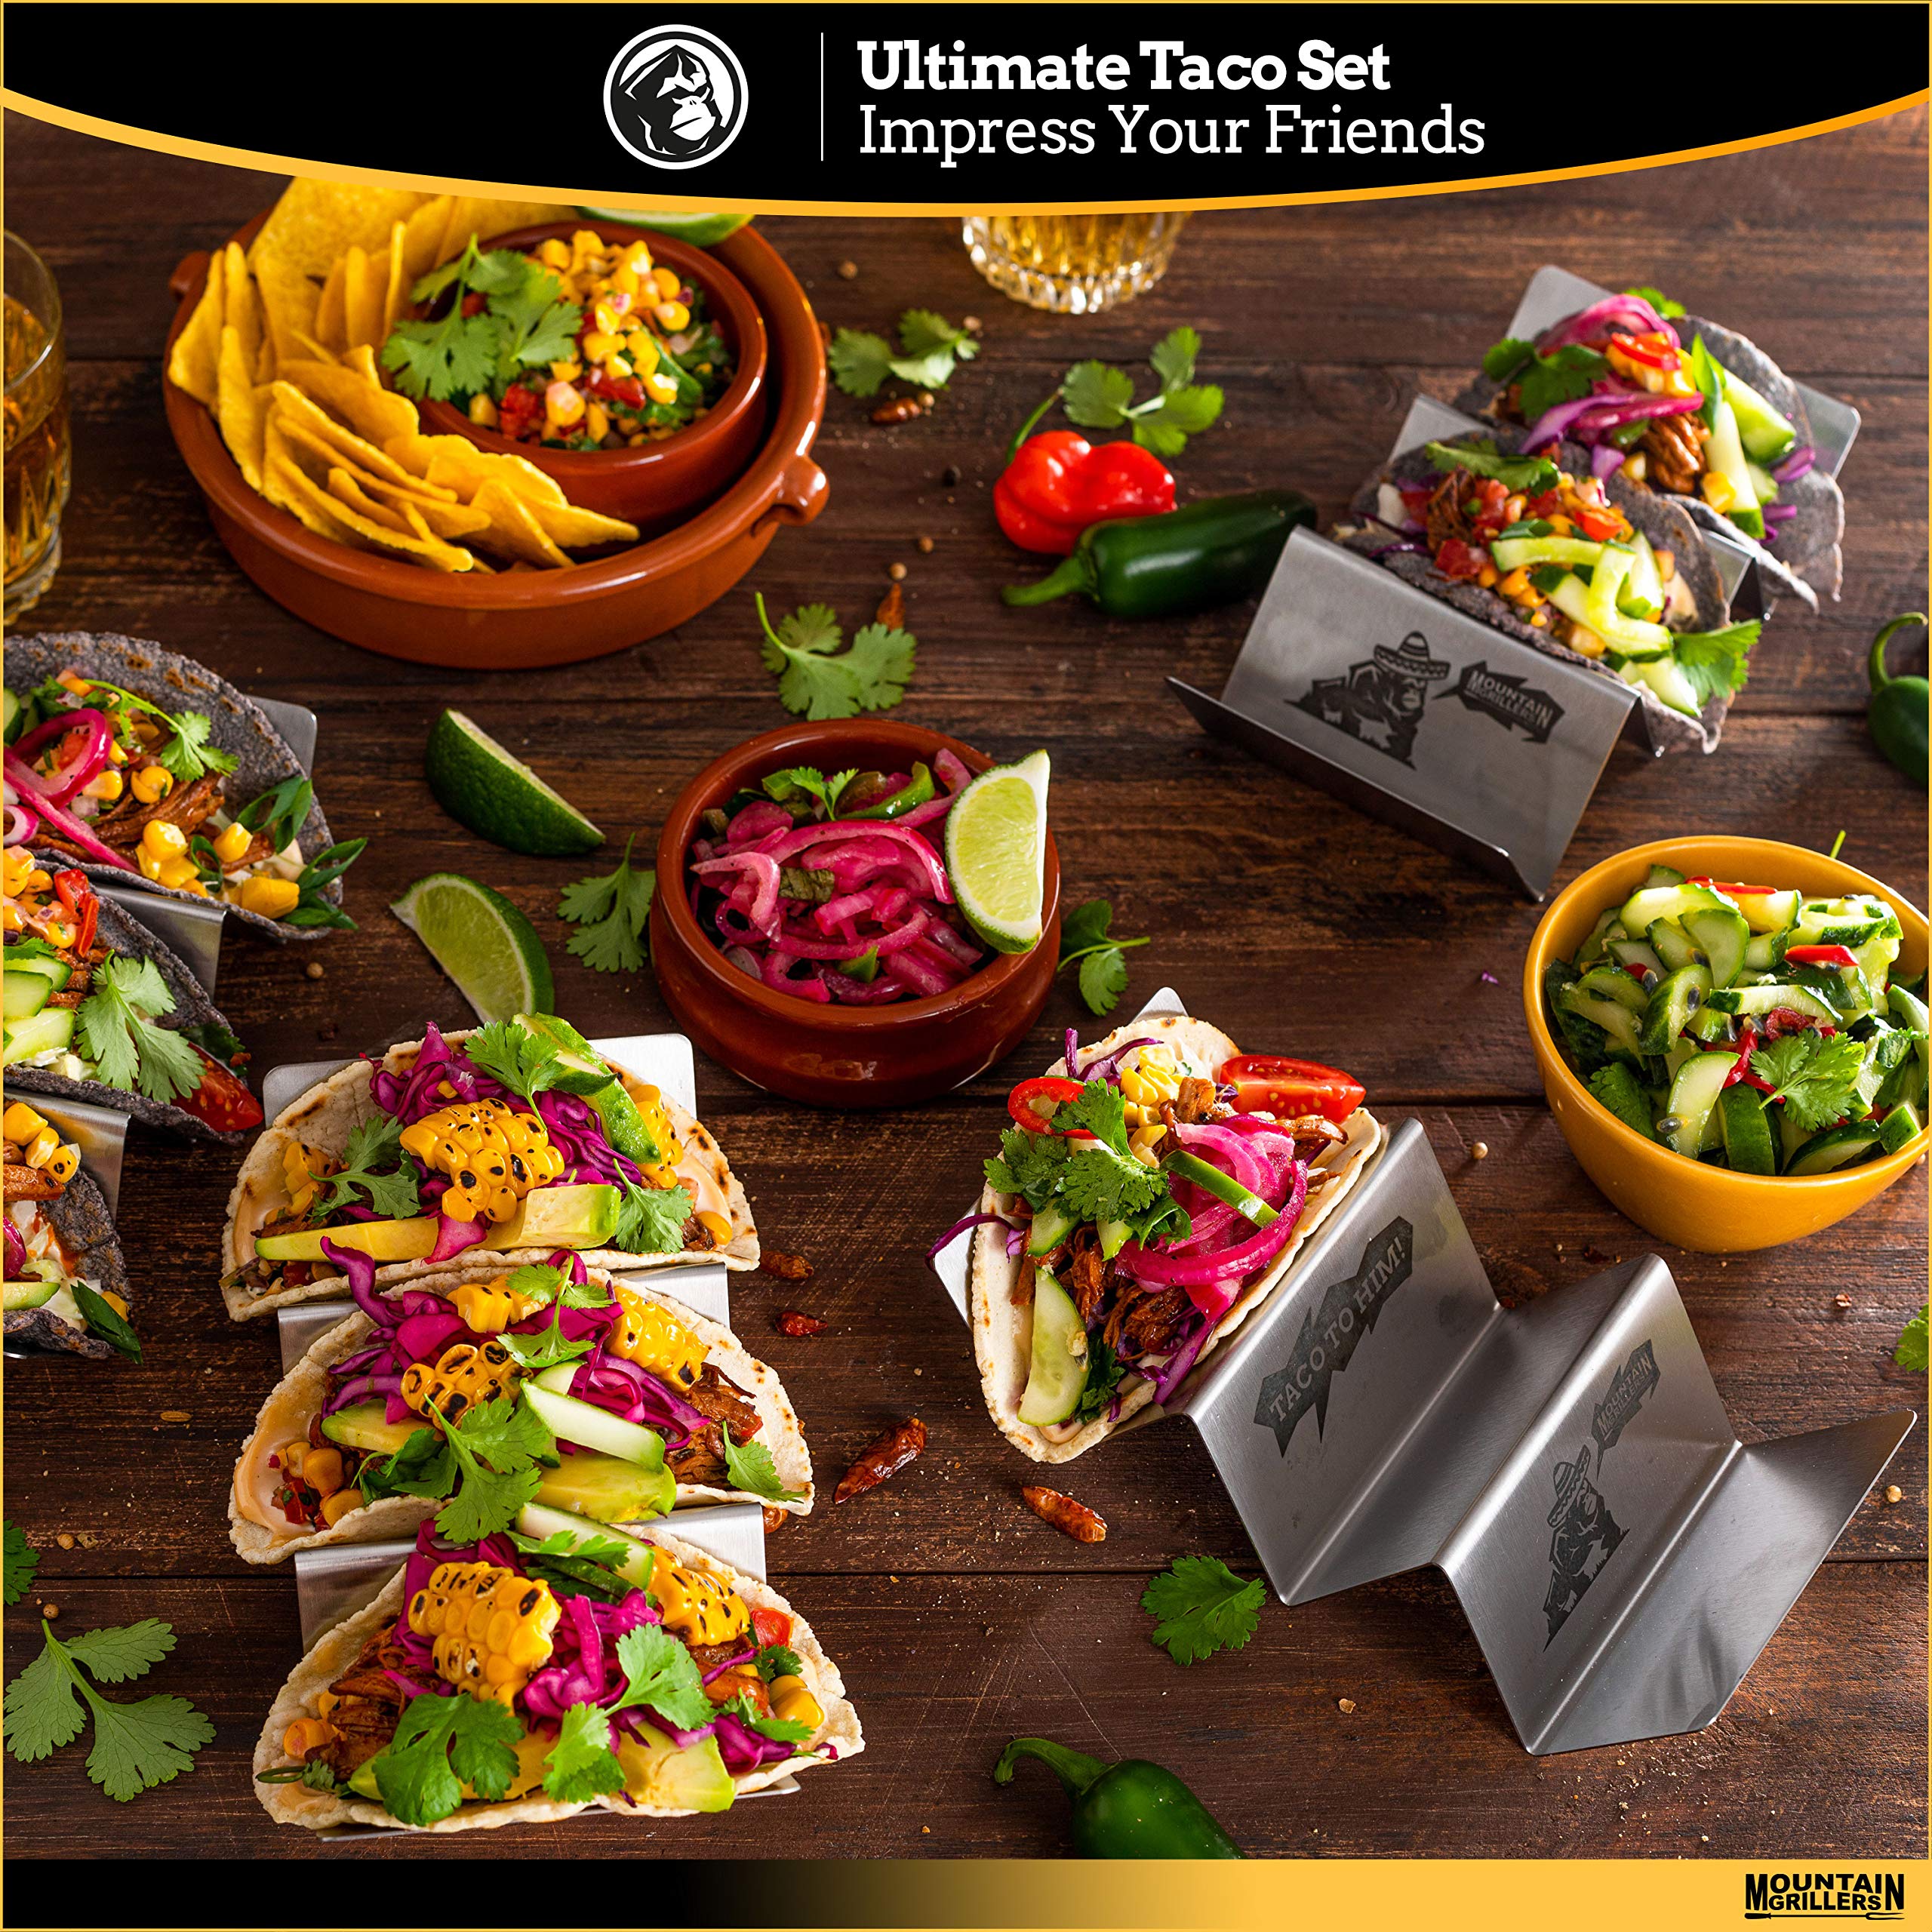 MOUNTAIN GRILLERS Taco Holders Stainless Steel Set of 4 - Reversible Tortilla Holder Tray Can Hold 2 or 3 Shells - Taco Tuesday Makes Prep a Breeze, No Mess - Dishwasher Safe